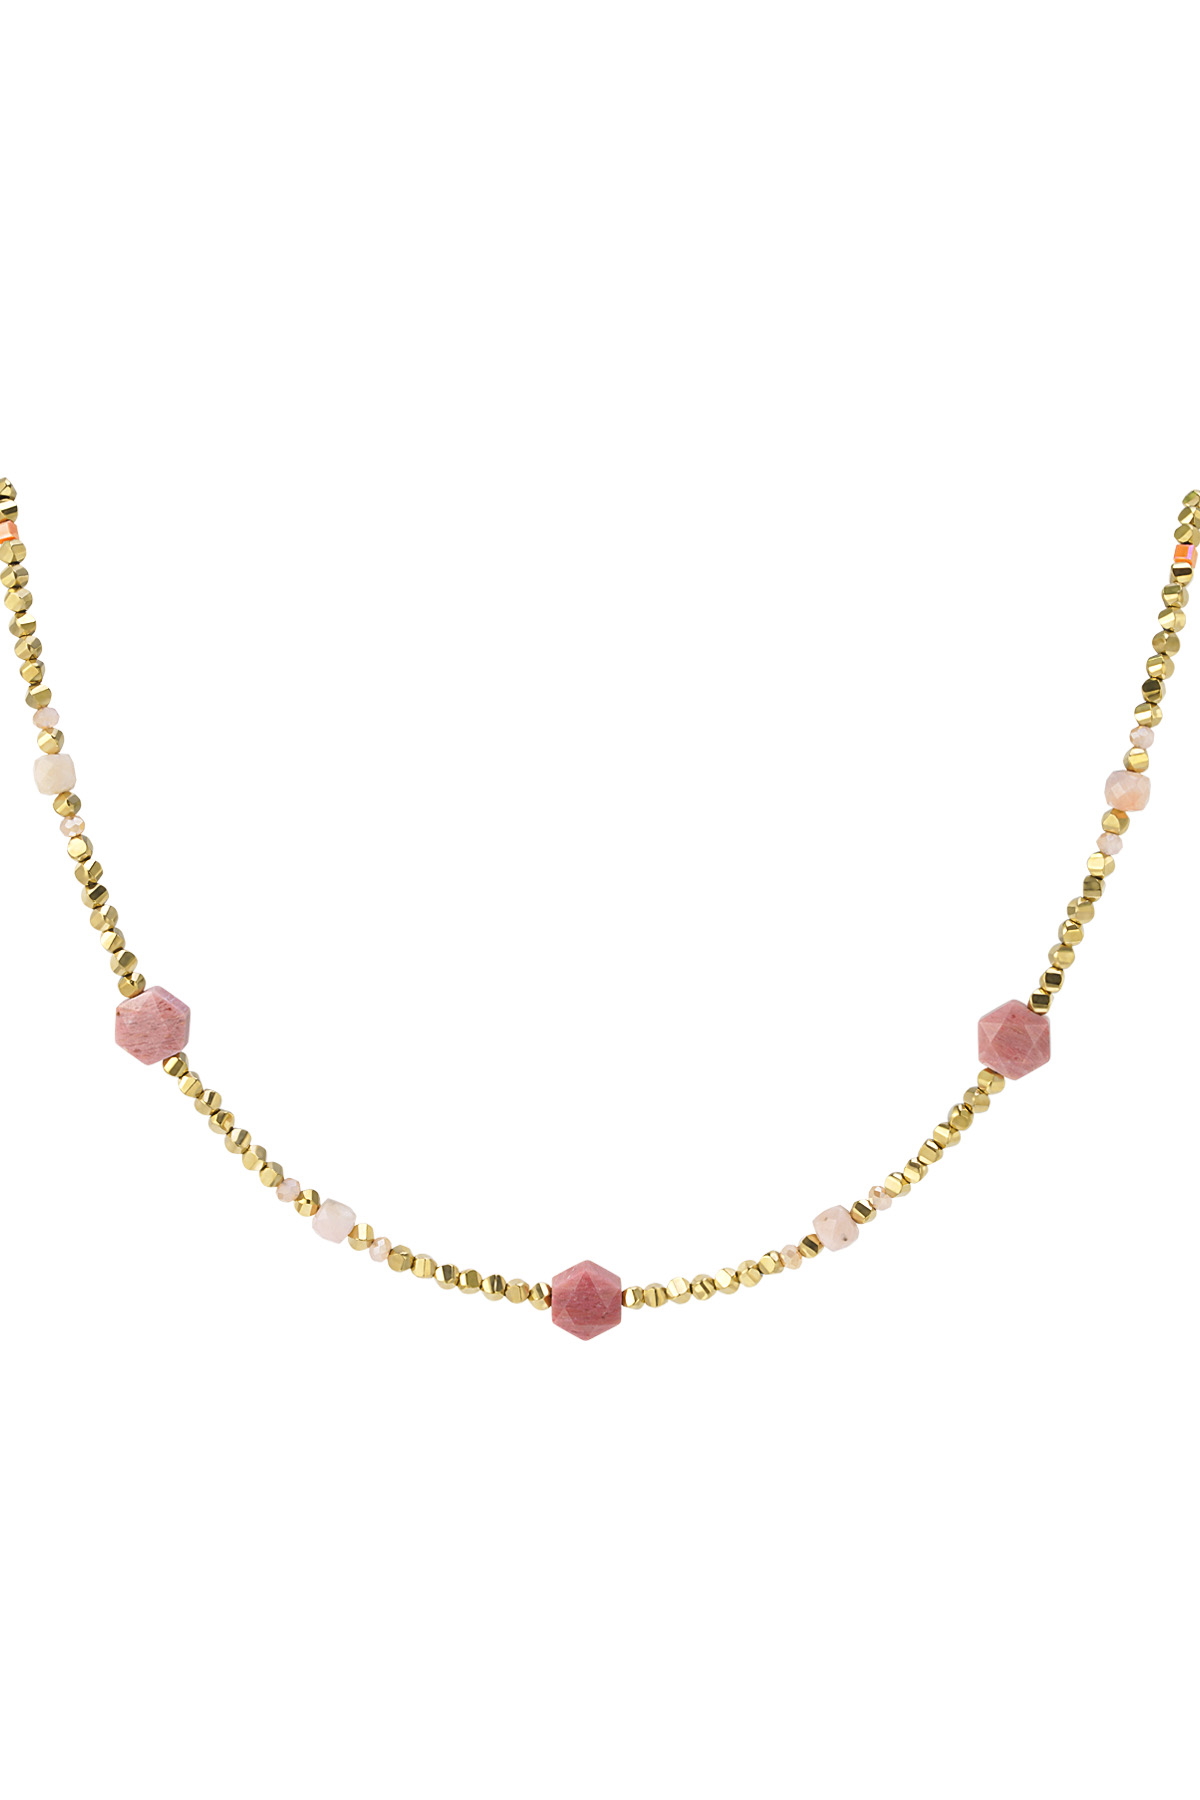 Beaded necklace different beads - pink & gold Stainless Steel 